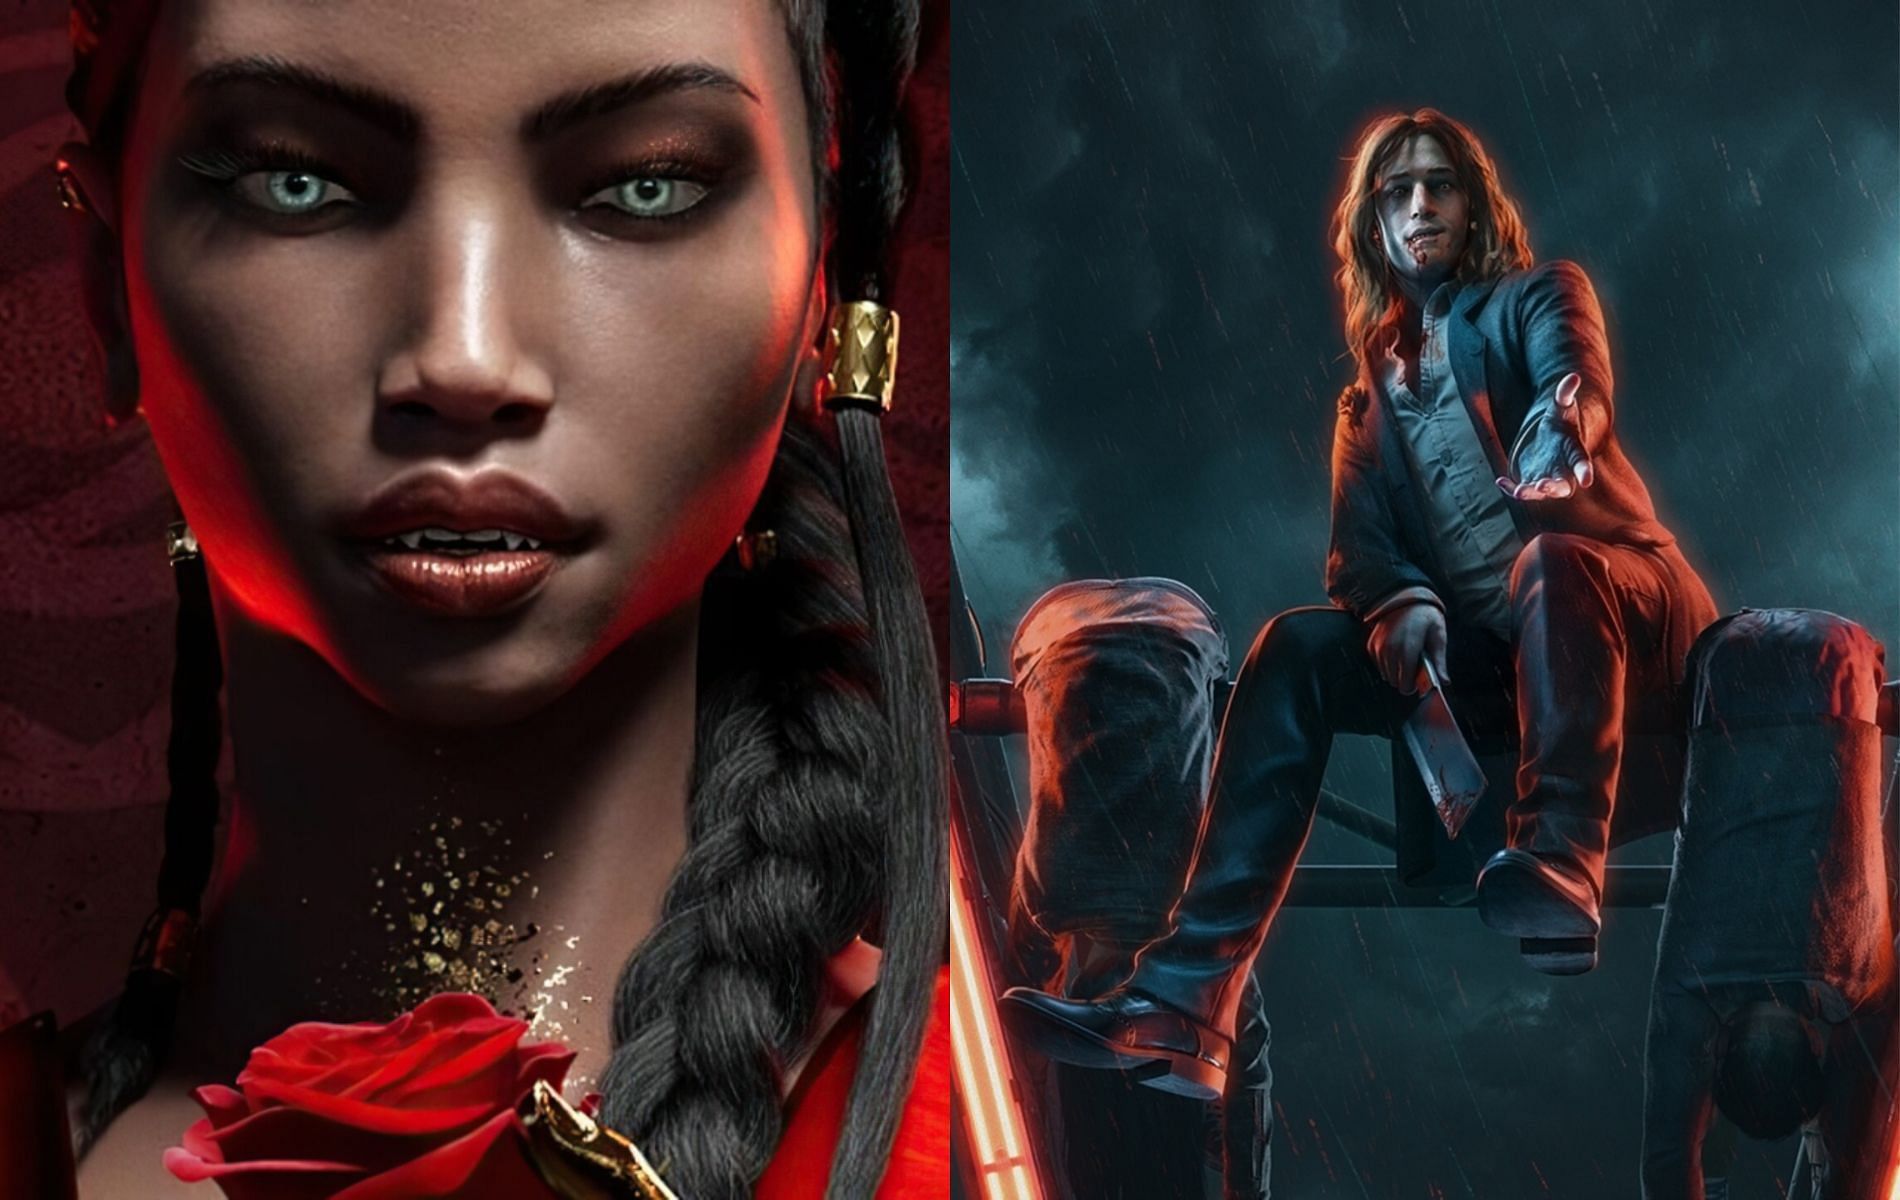 Vampire: The Masquerade – Bloodlines 2: a legendary video game returns, Games